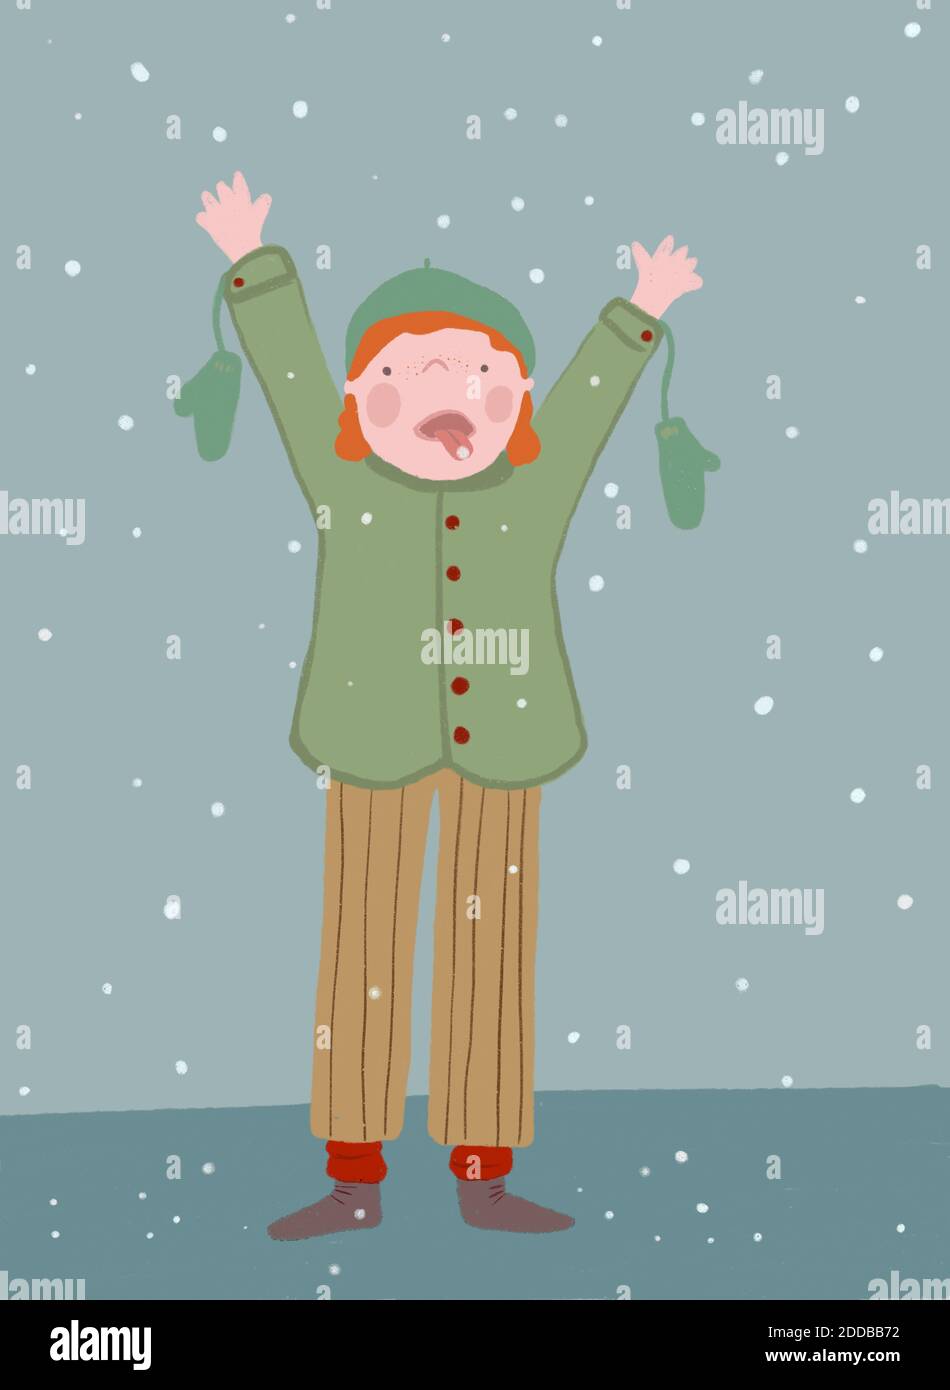 Clip art of boy catching snowflakes in winter Stock Photo